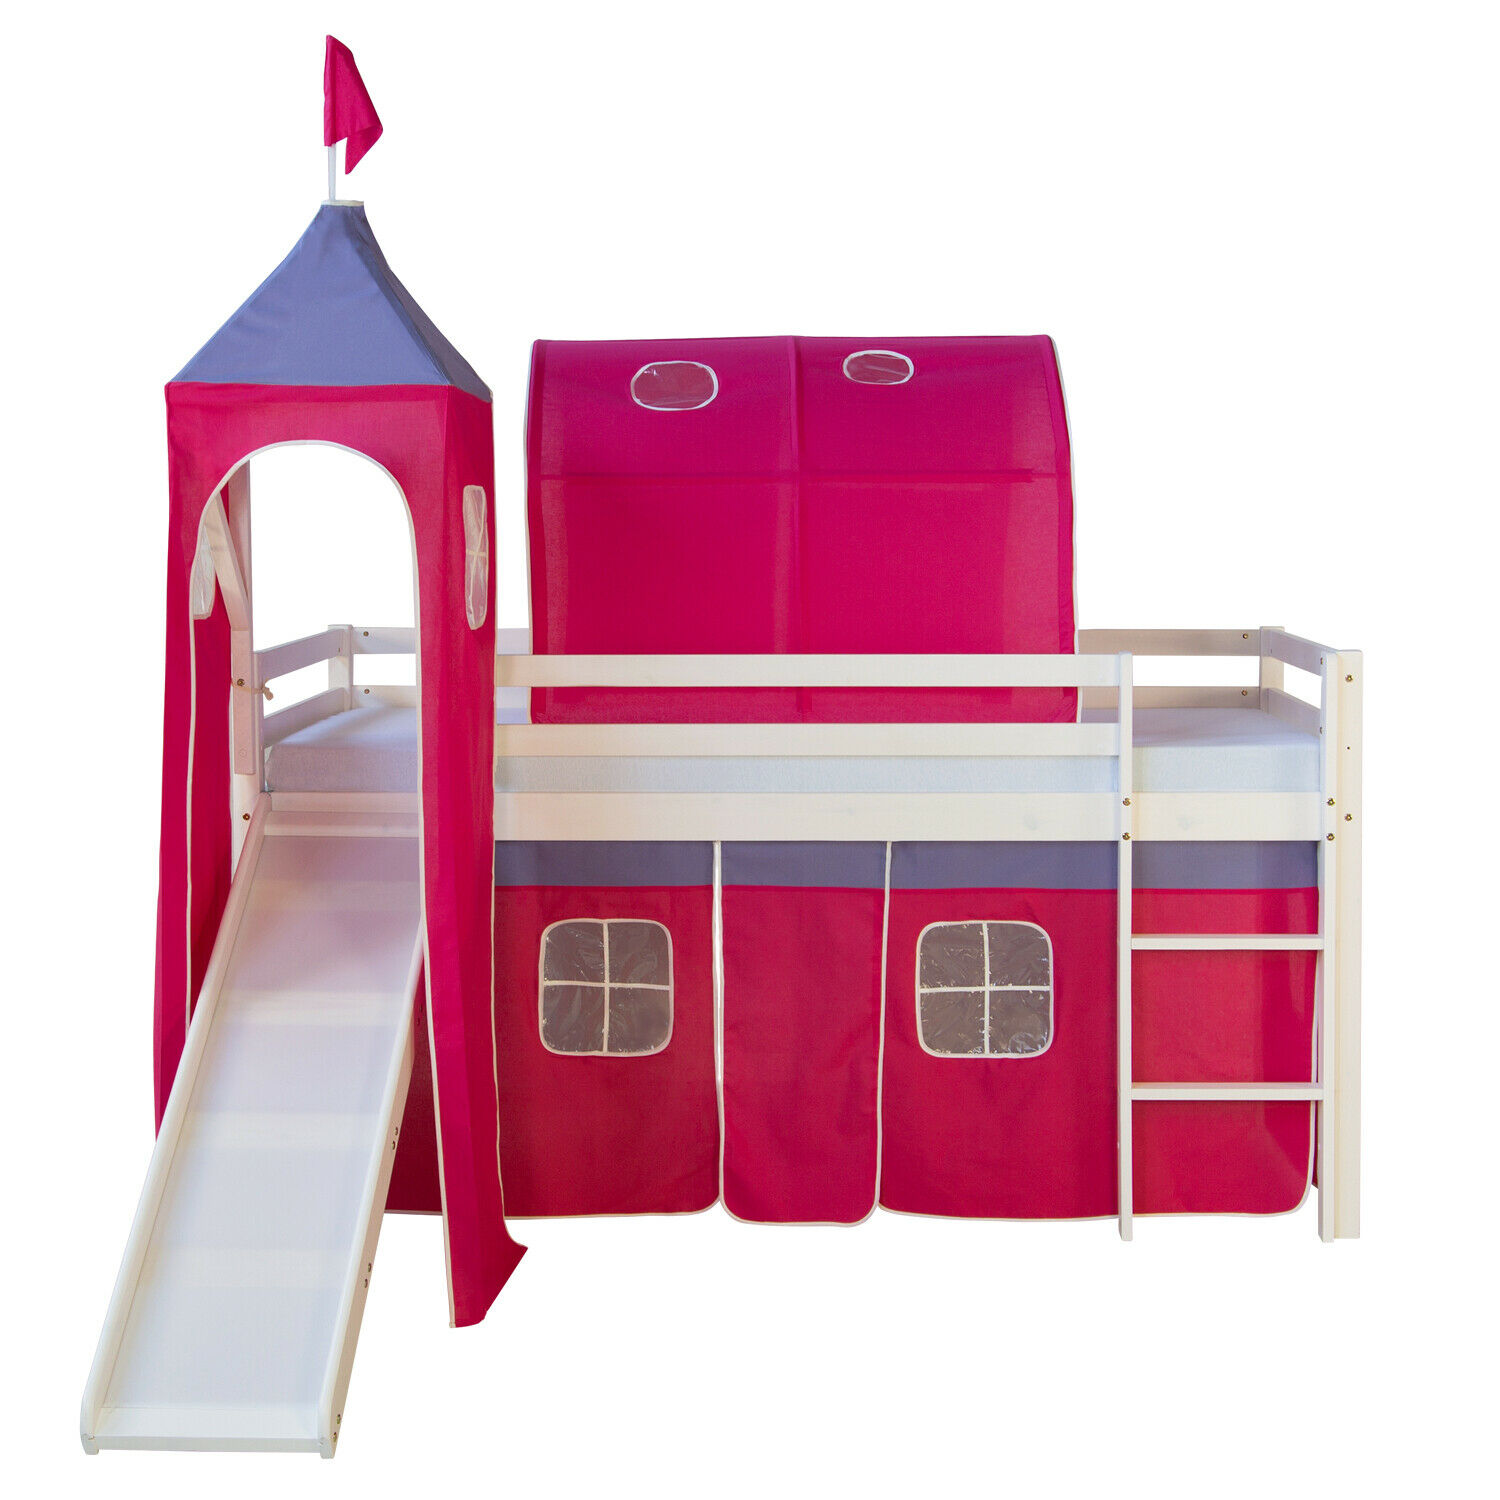 Loftbed Childrenbed Ladder Slide Tunnel Tower Solid Pine Curtain Red 90x200